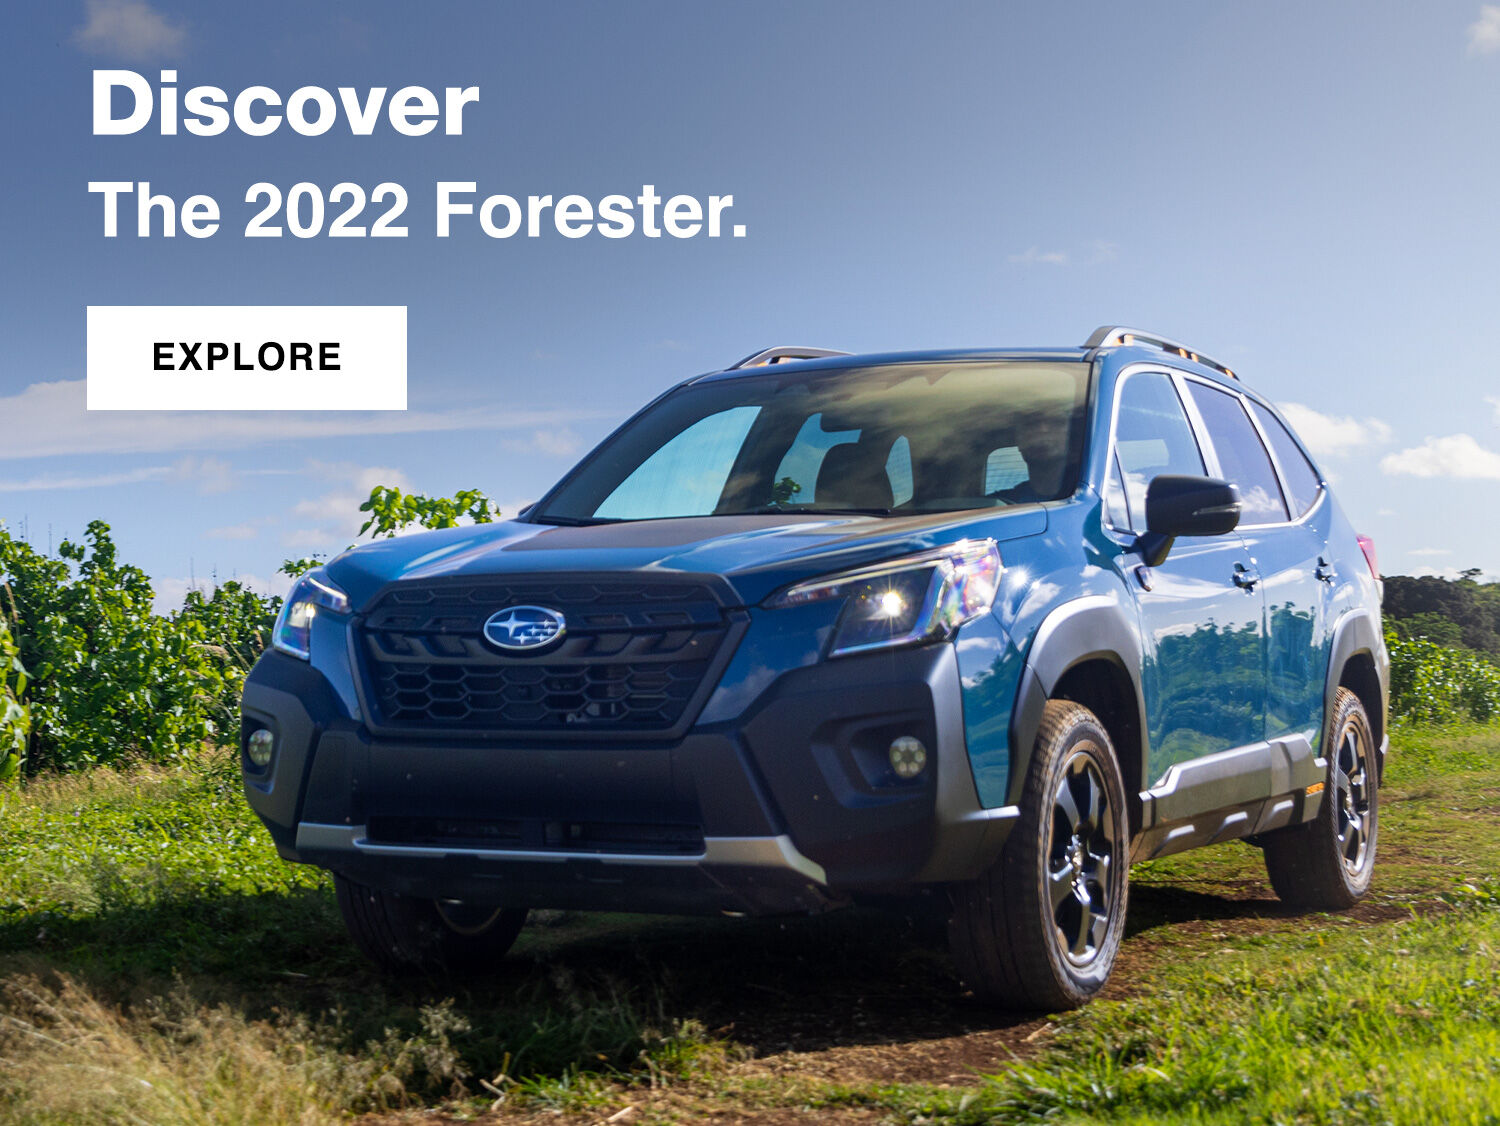 The 2022 Forester driving in an open field.